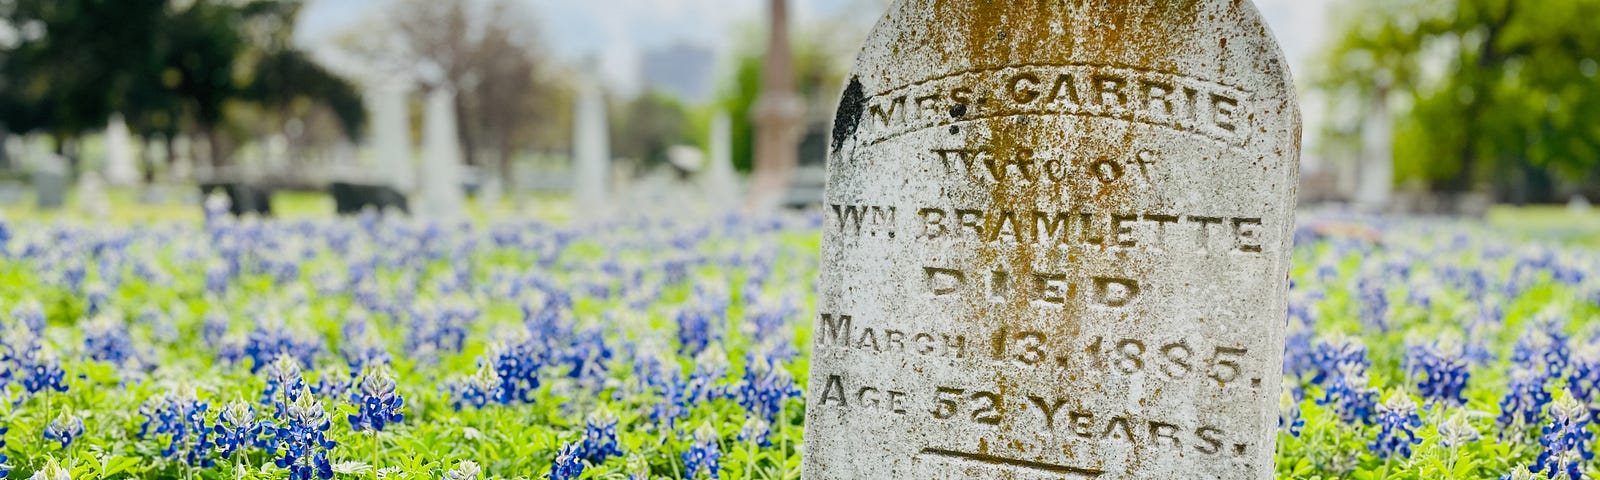 Tombstone in a field of blue bonnet wildflowers on a sunny day.